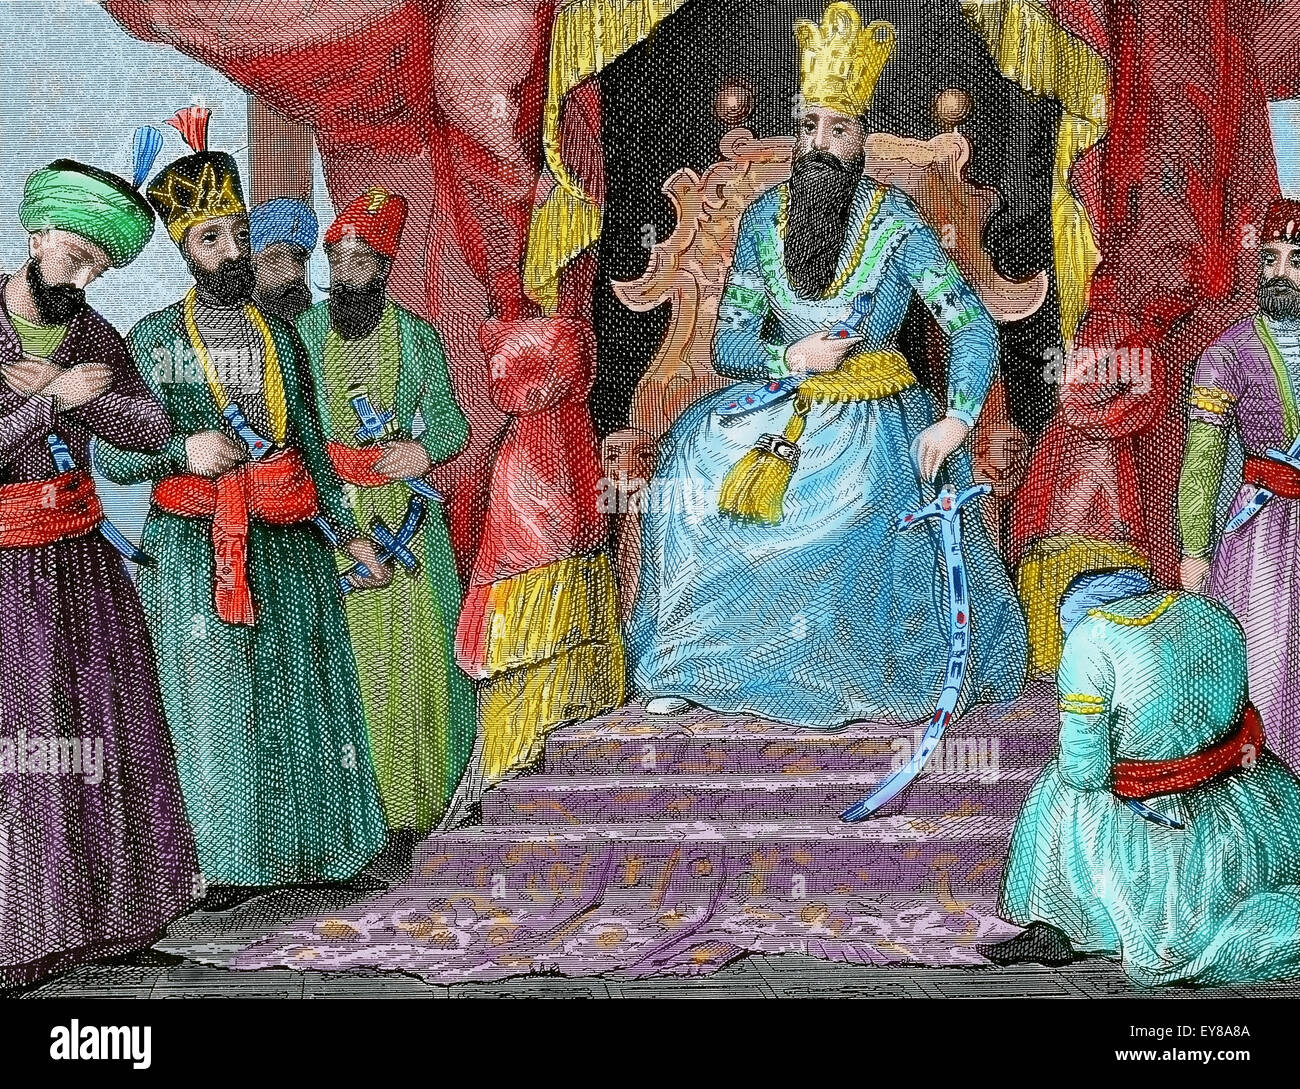 Ottoman Empire. Turkey. Sultan received in the courtroom of the Topkapi Palace counselors. Istanbul. Recorded. Engraving 19th century. Colored. Stock Photo